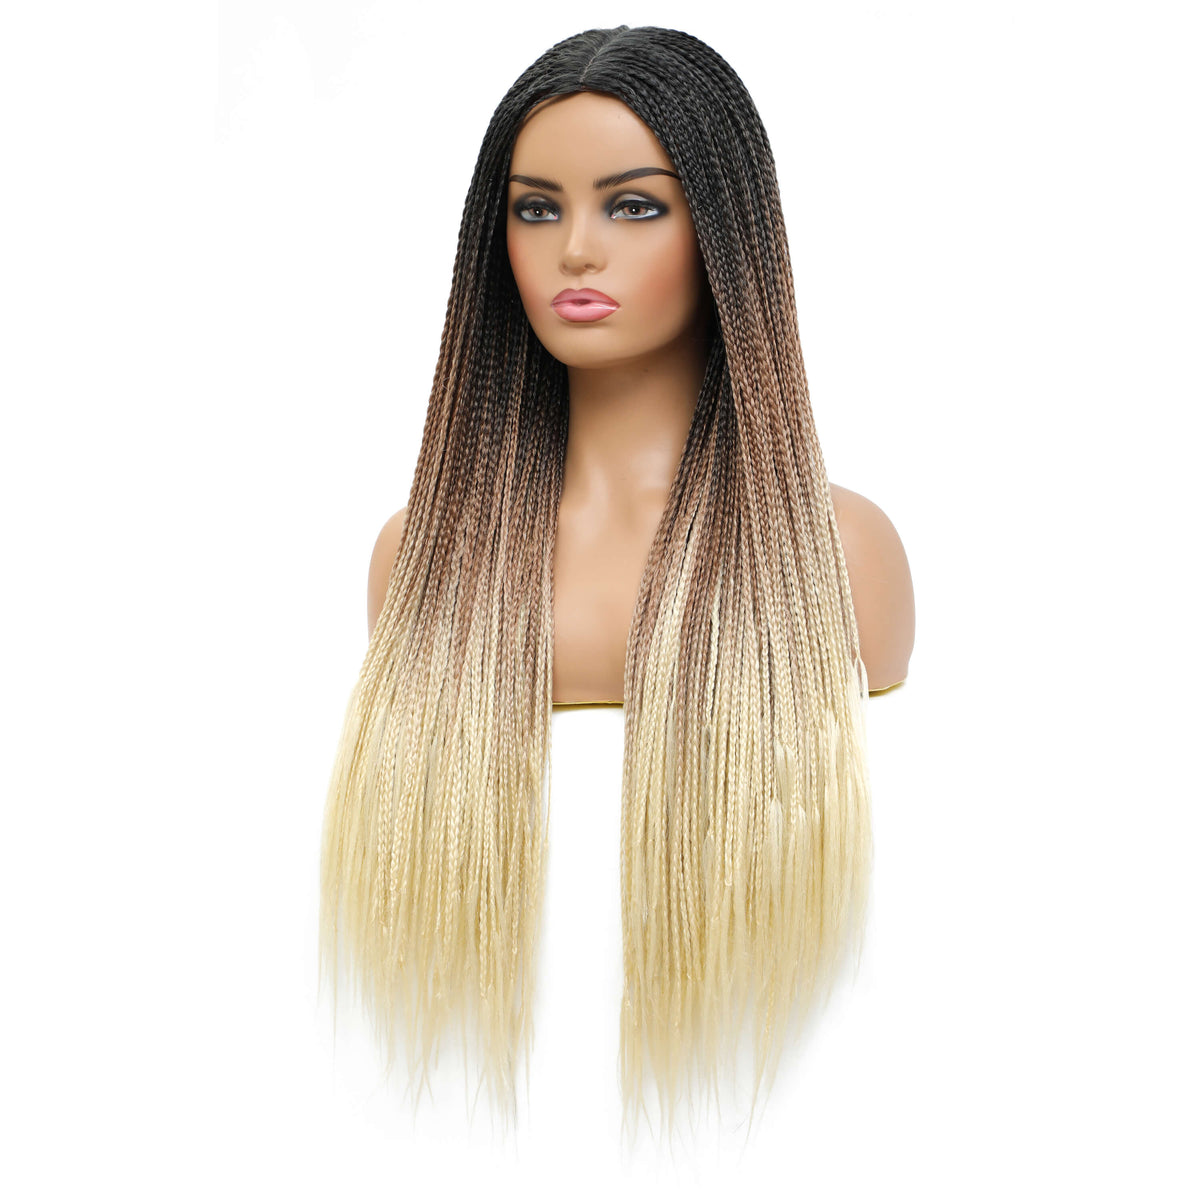 Box Braided Wigs for Black Women 3 Tone Black to Brown to Blonde Wigs Side